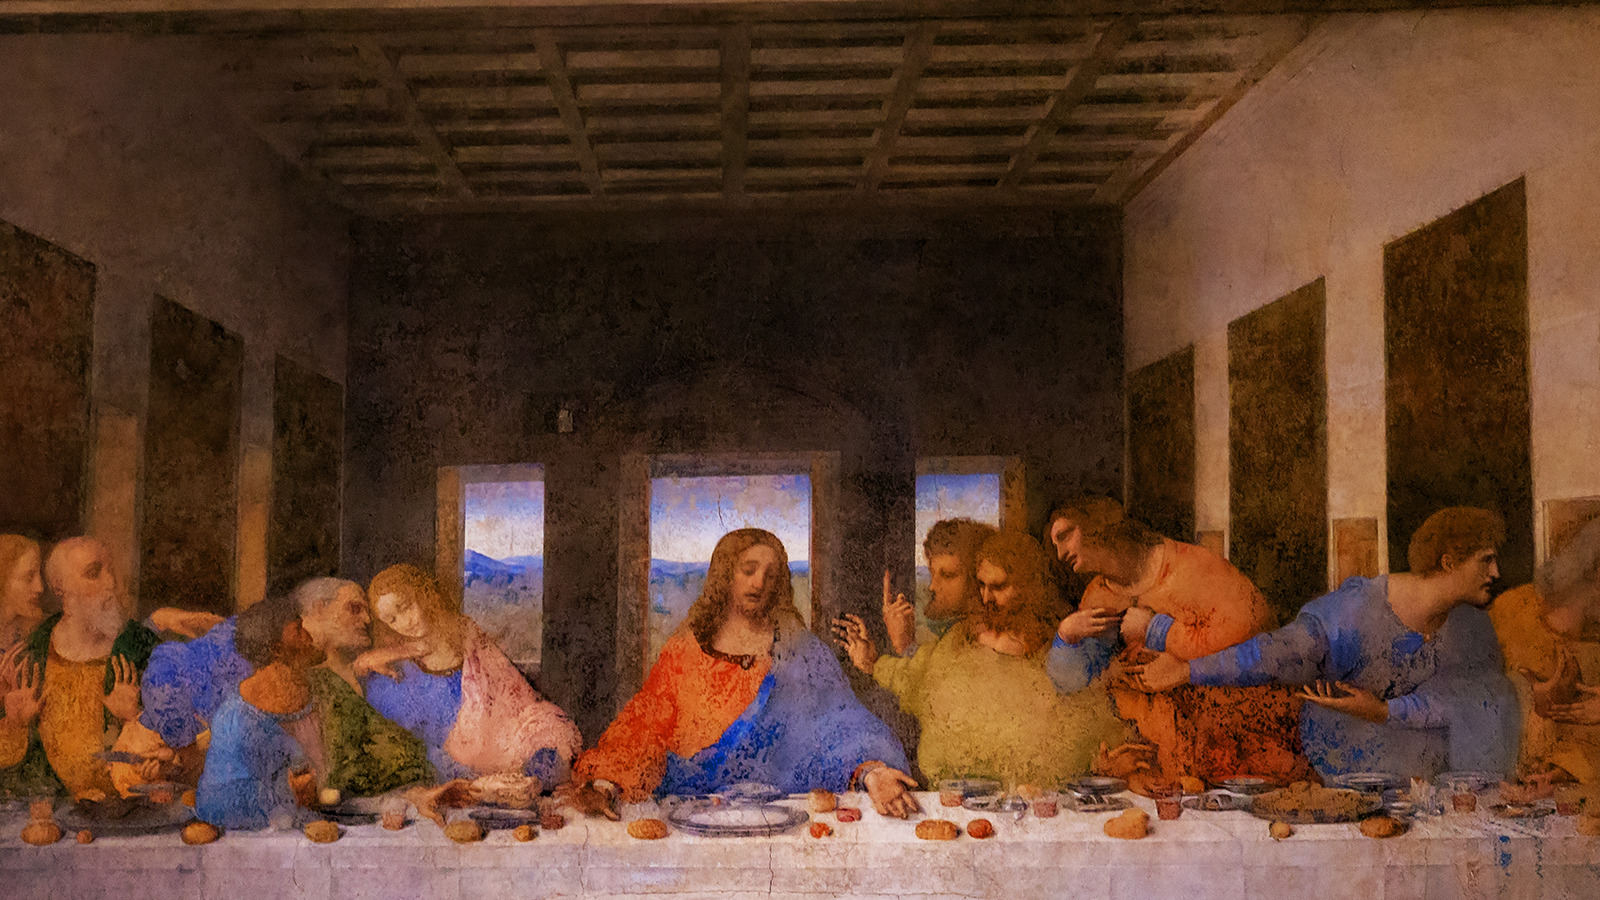 What Was On The Table At The Last Supper?